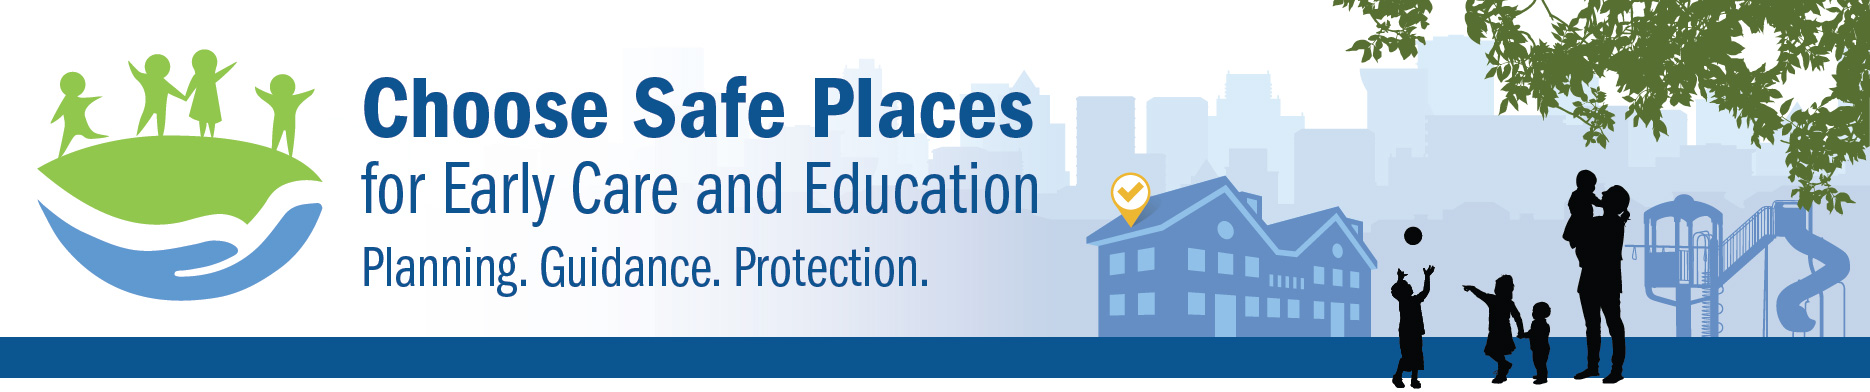 CSPECE logo with an illustration of a mother and kids in a playground setting.